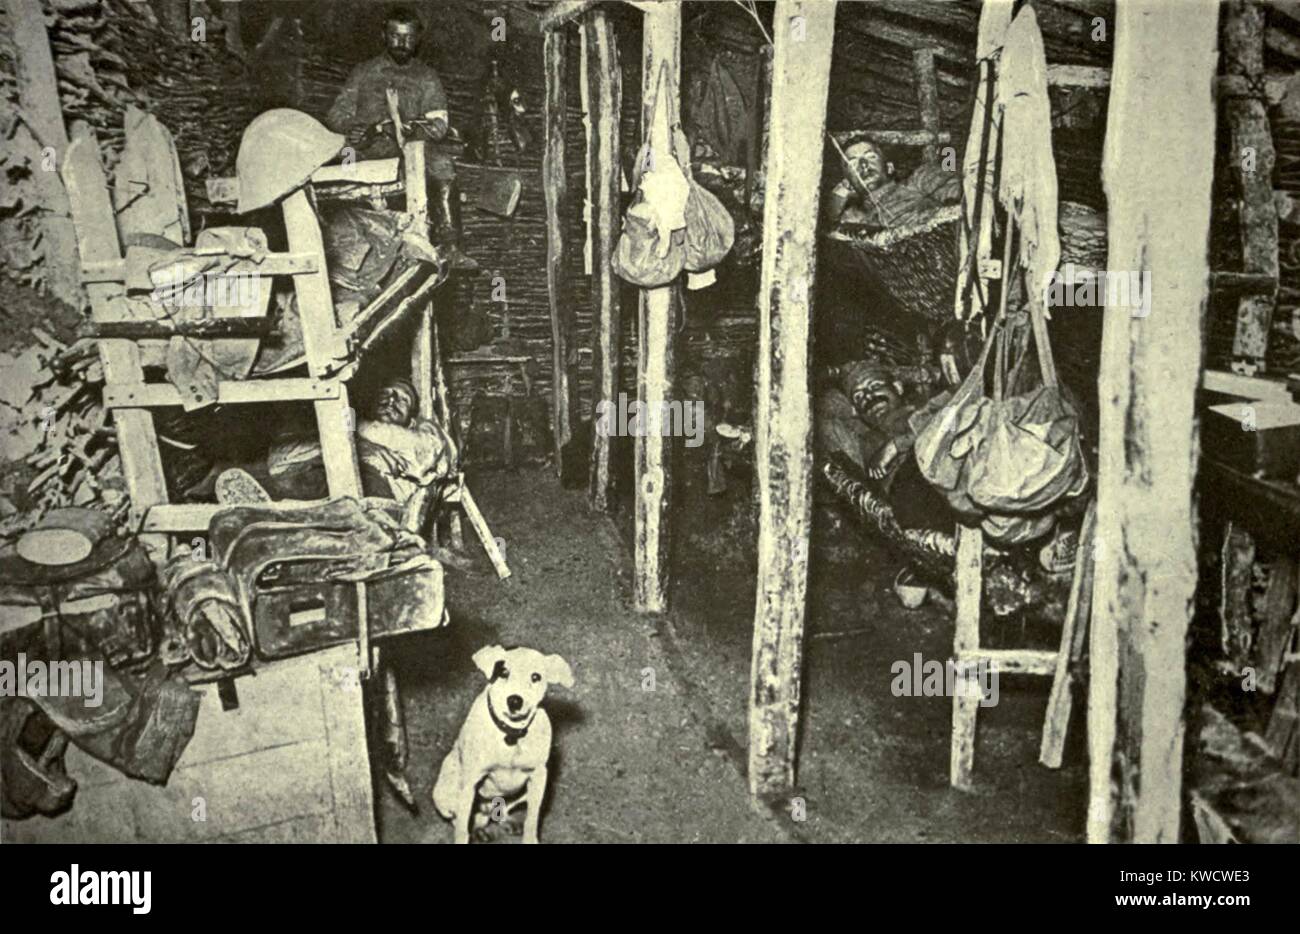 World War 1: Battle of Verdun. One of the subsurface chambers in fortified Verdun was used as a hospital. The little dog in the foreground refused to be separated from his wounded master. Ca. 1916. (BSLOC 2013 1 93) Stock Photo